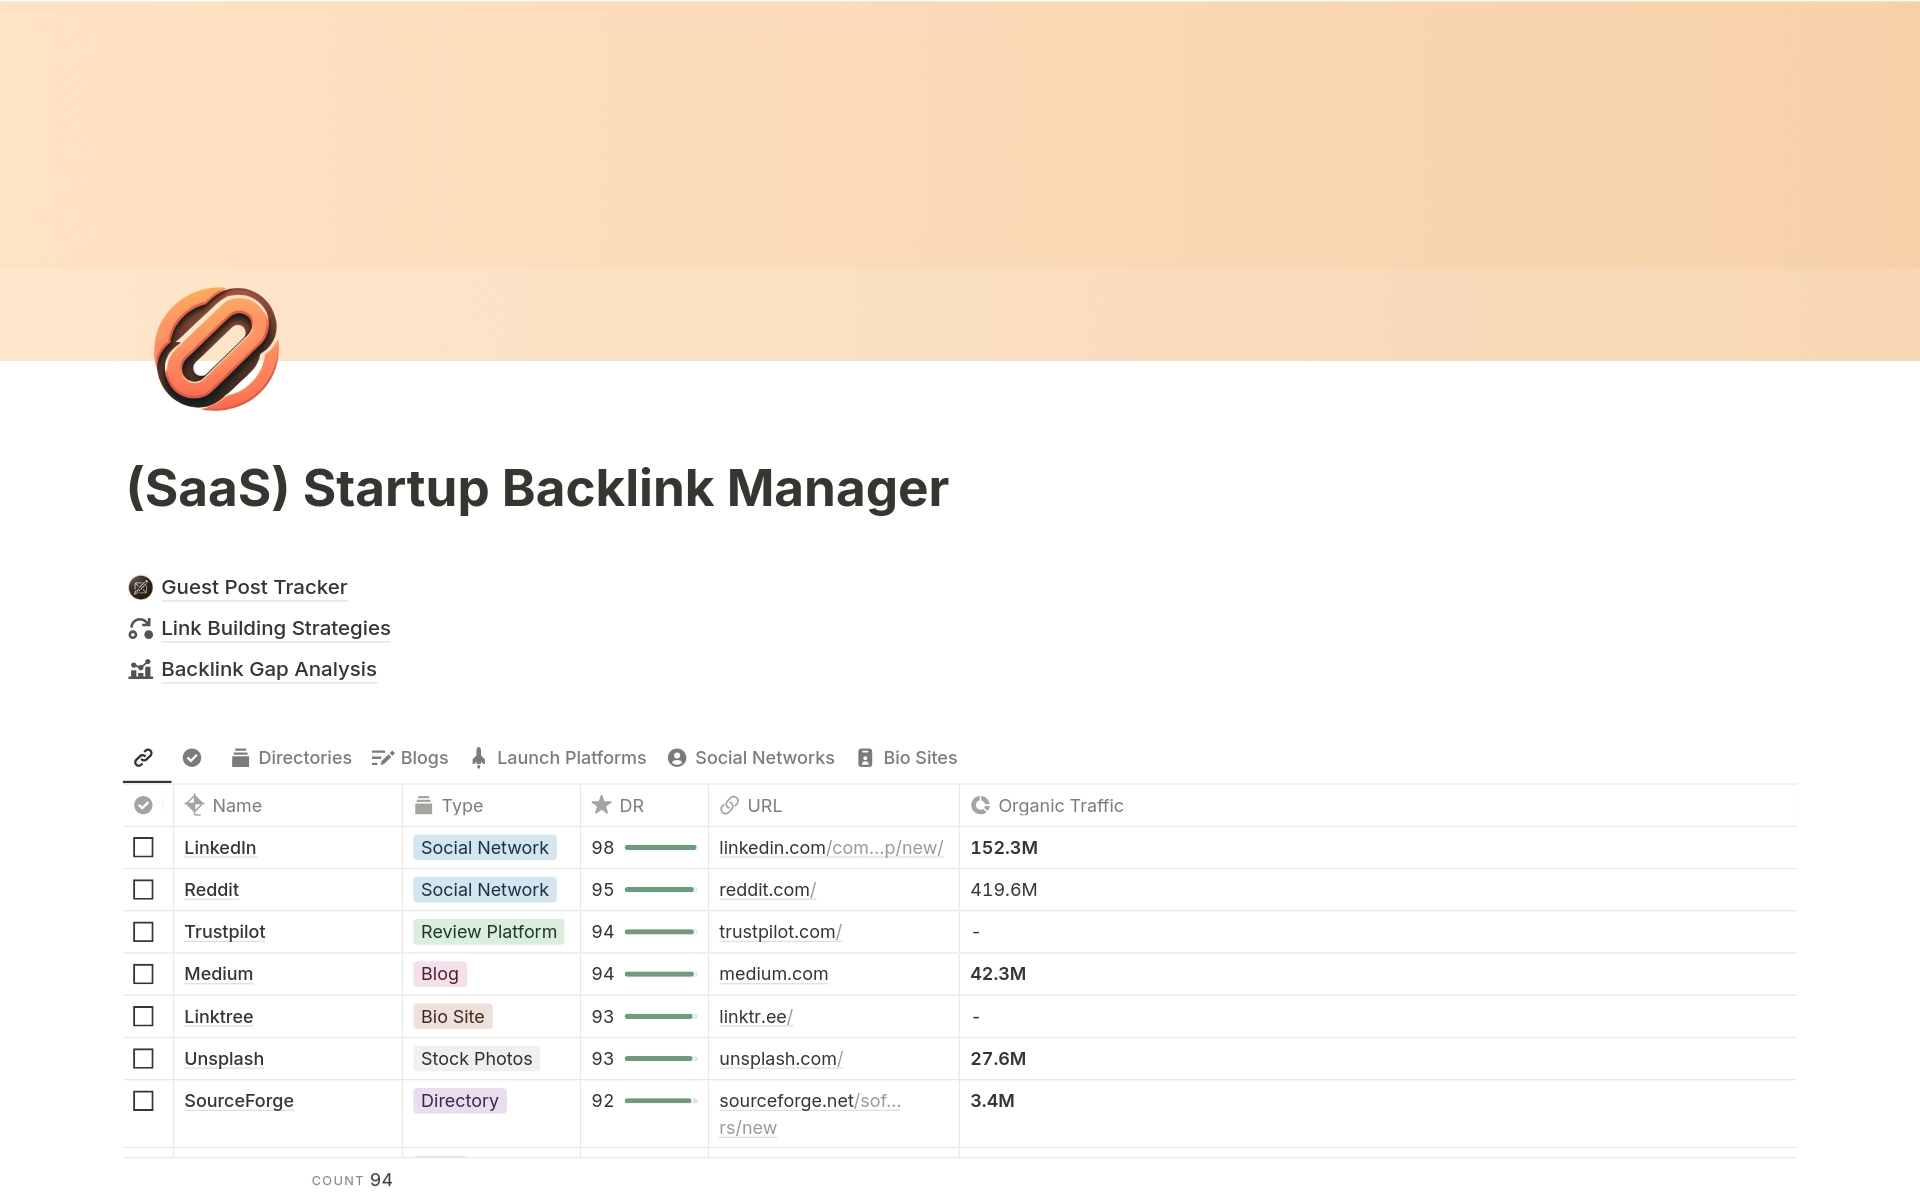 SEO Backlinks Manager is a tool that will help you organize and track all your backlinks. You can add DR ratings, organic traffic scores, and check off submitted websites. There's 90+ opportunities for backlinks inside, sorted on DR rating. You can also learn to score backlinks.